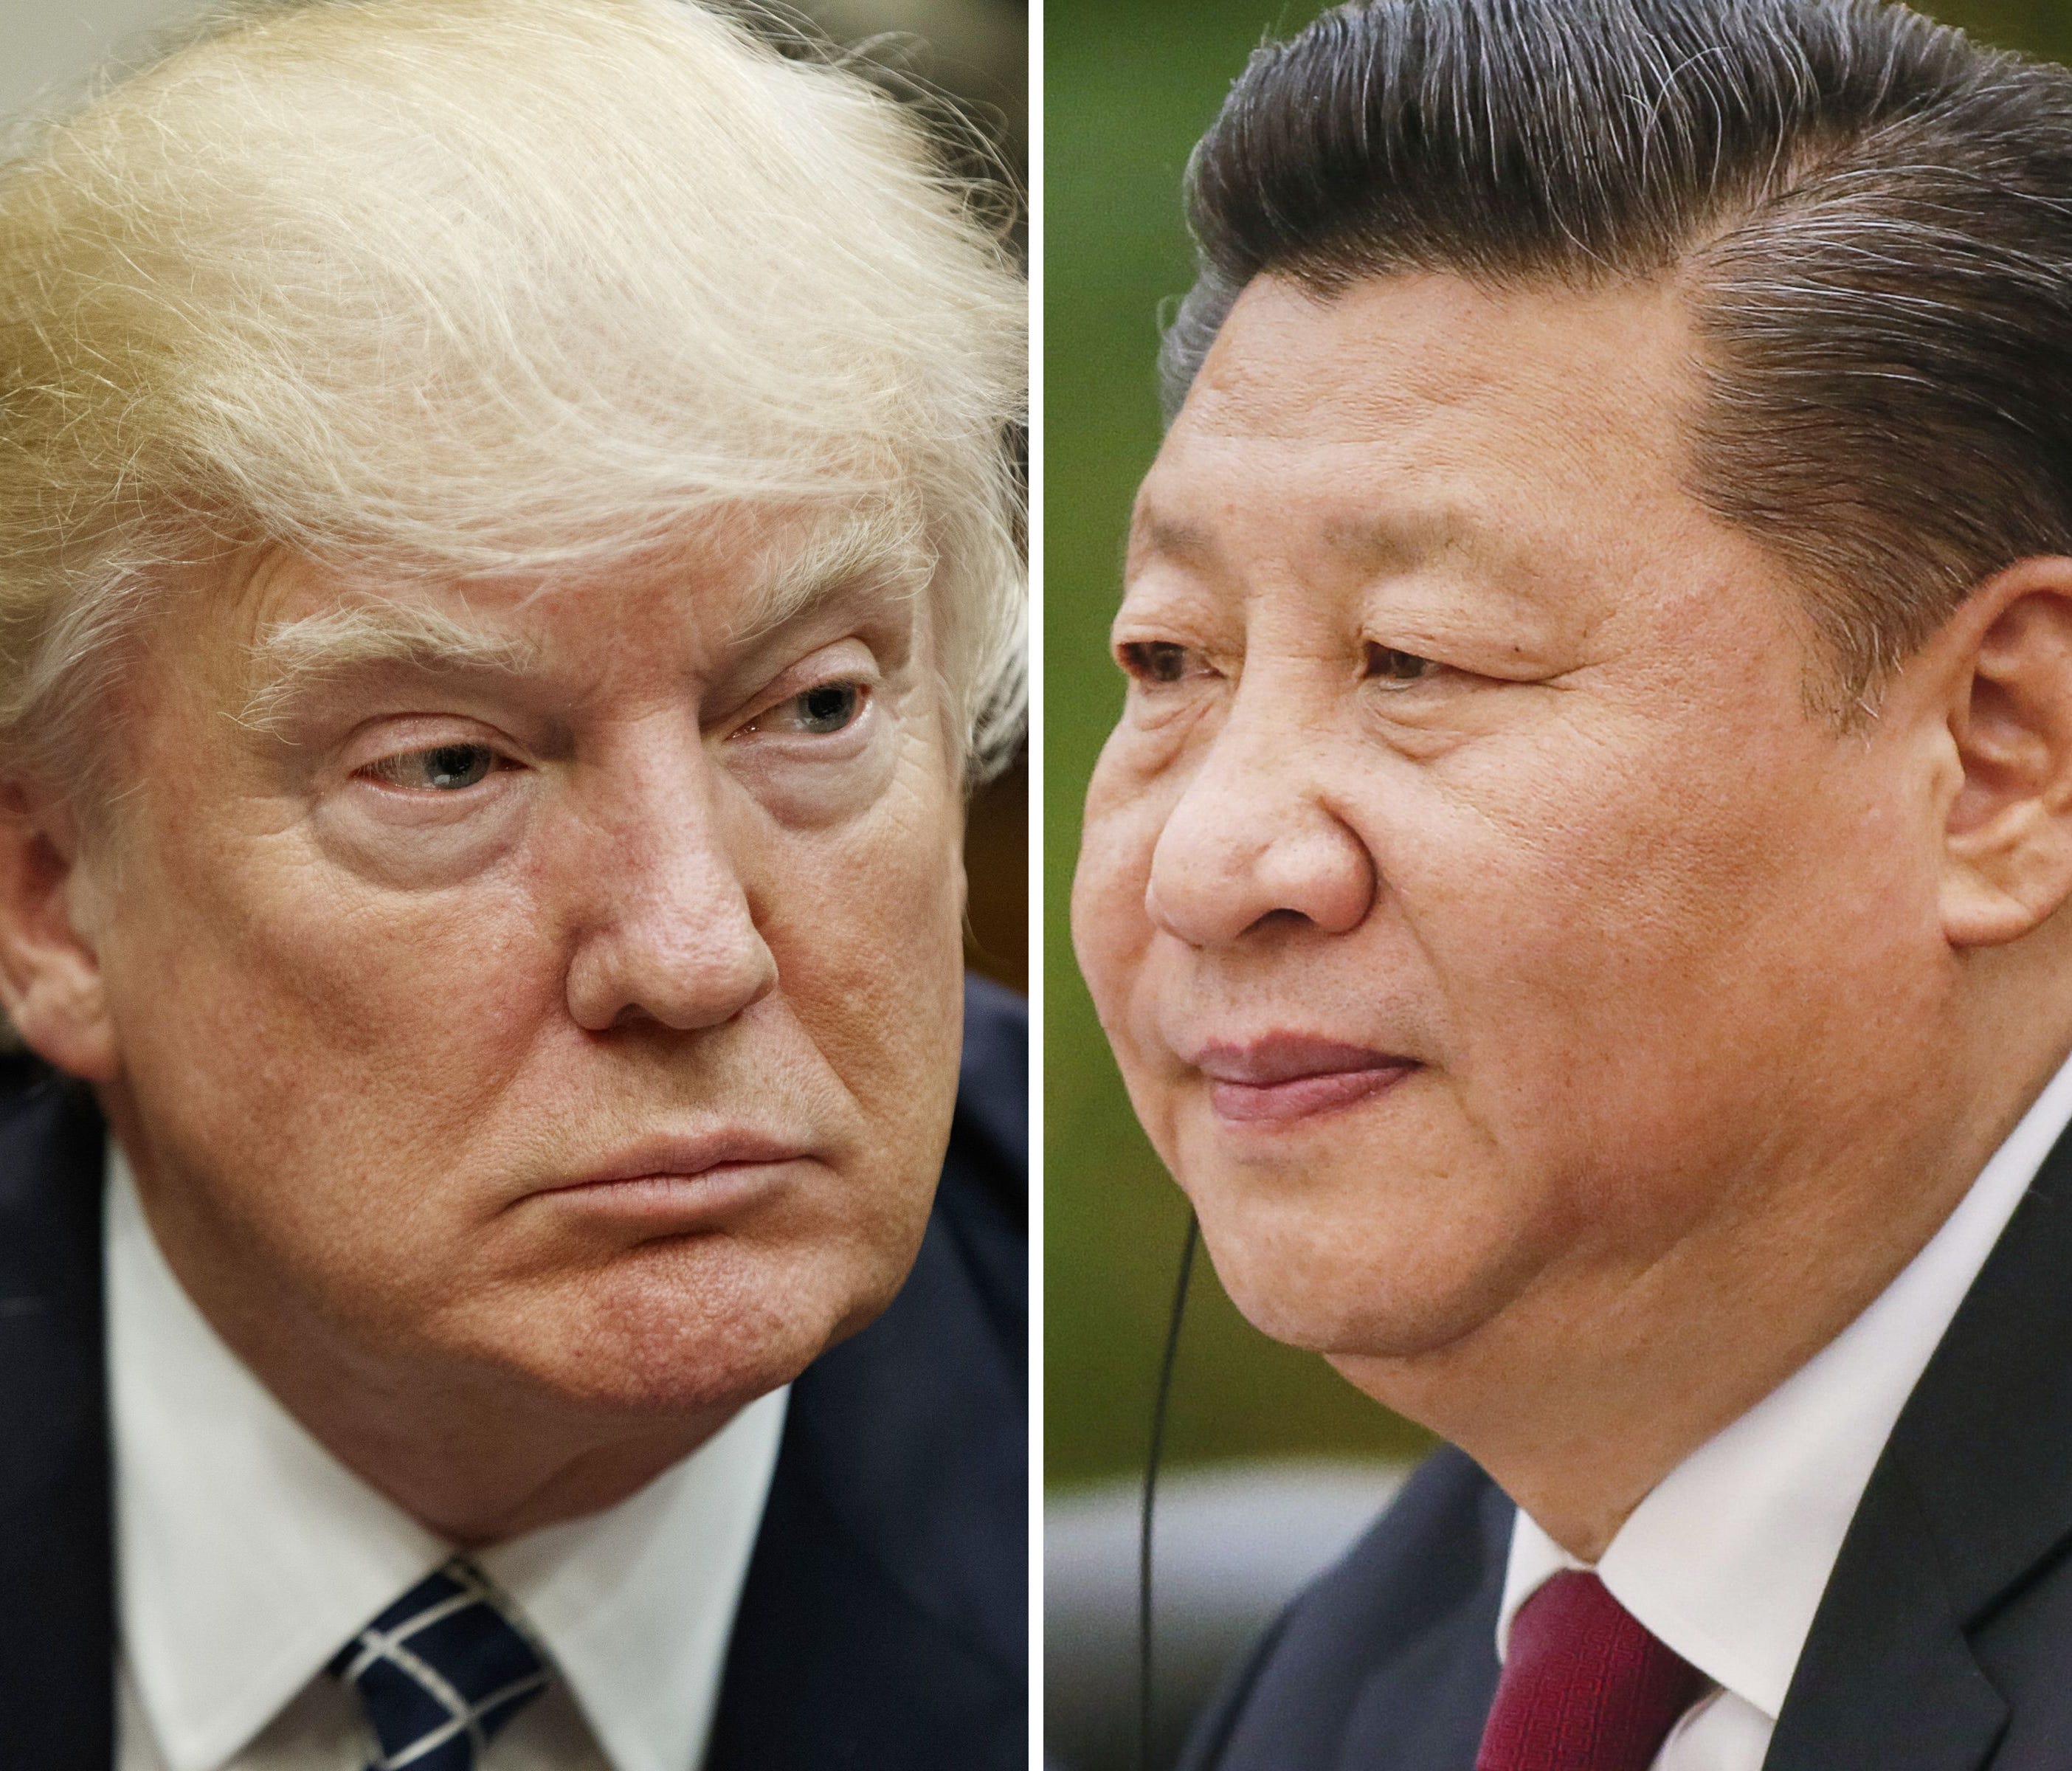 This combination of file photos shows U.S. President Donald Trump on March 28, 2017, in Washington, left, and Chinese President Xi Jinping on Feb. 22, 2017, in Beijing.